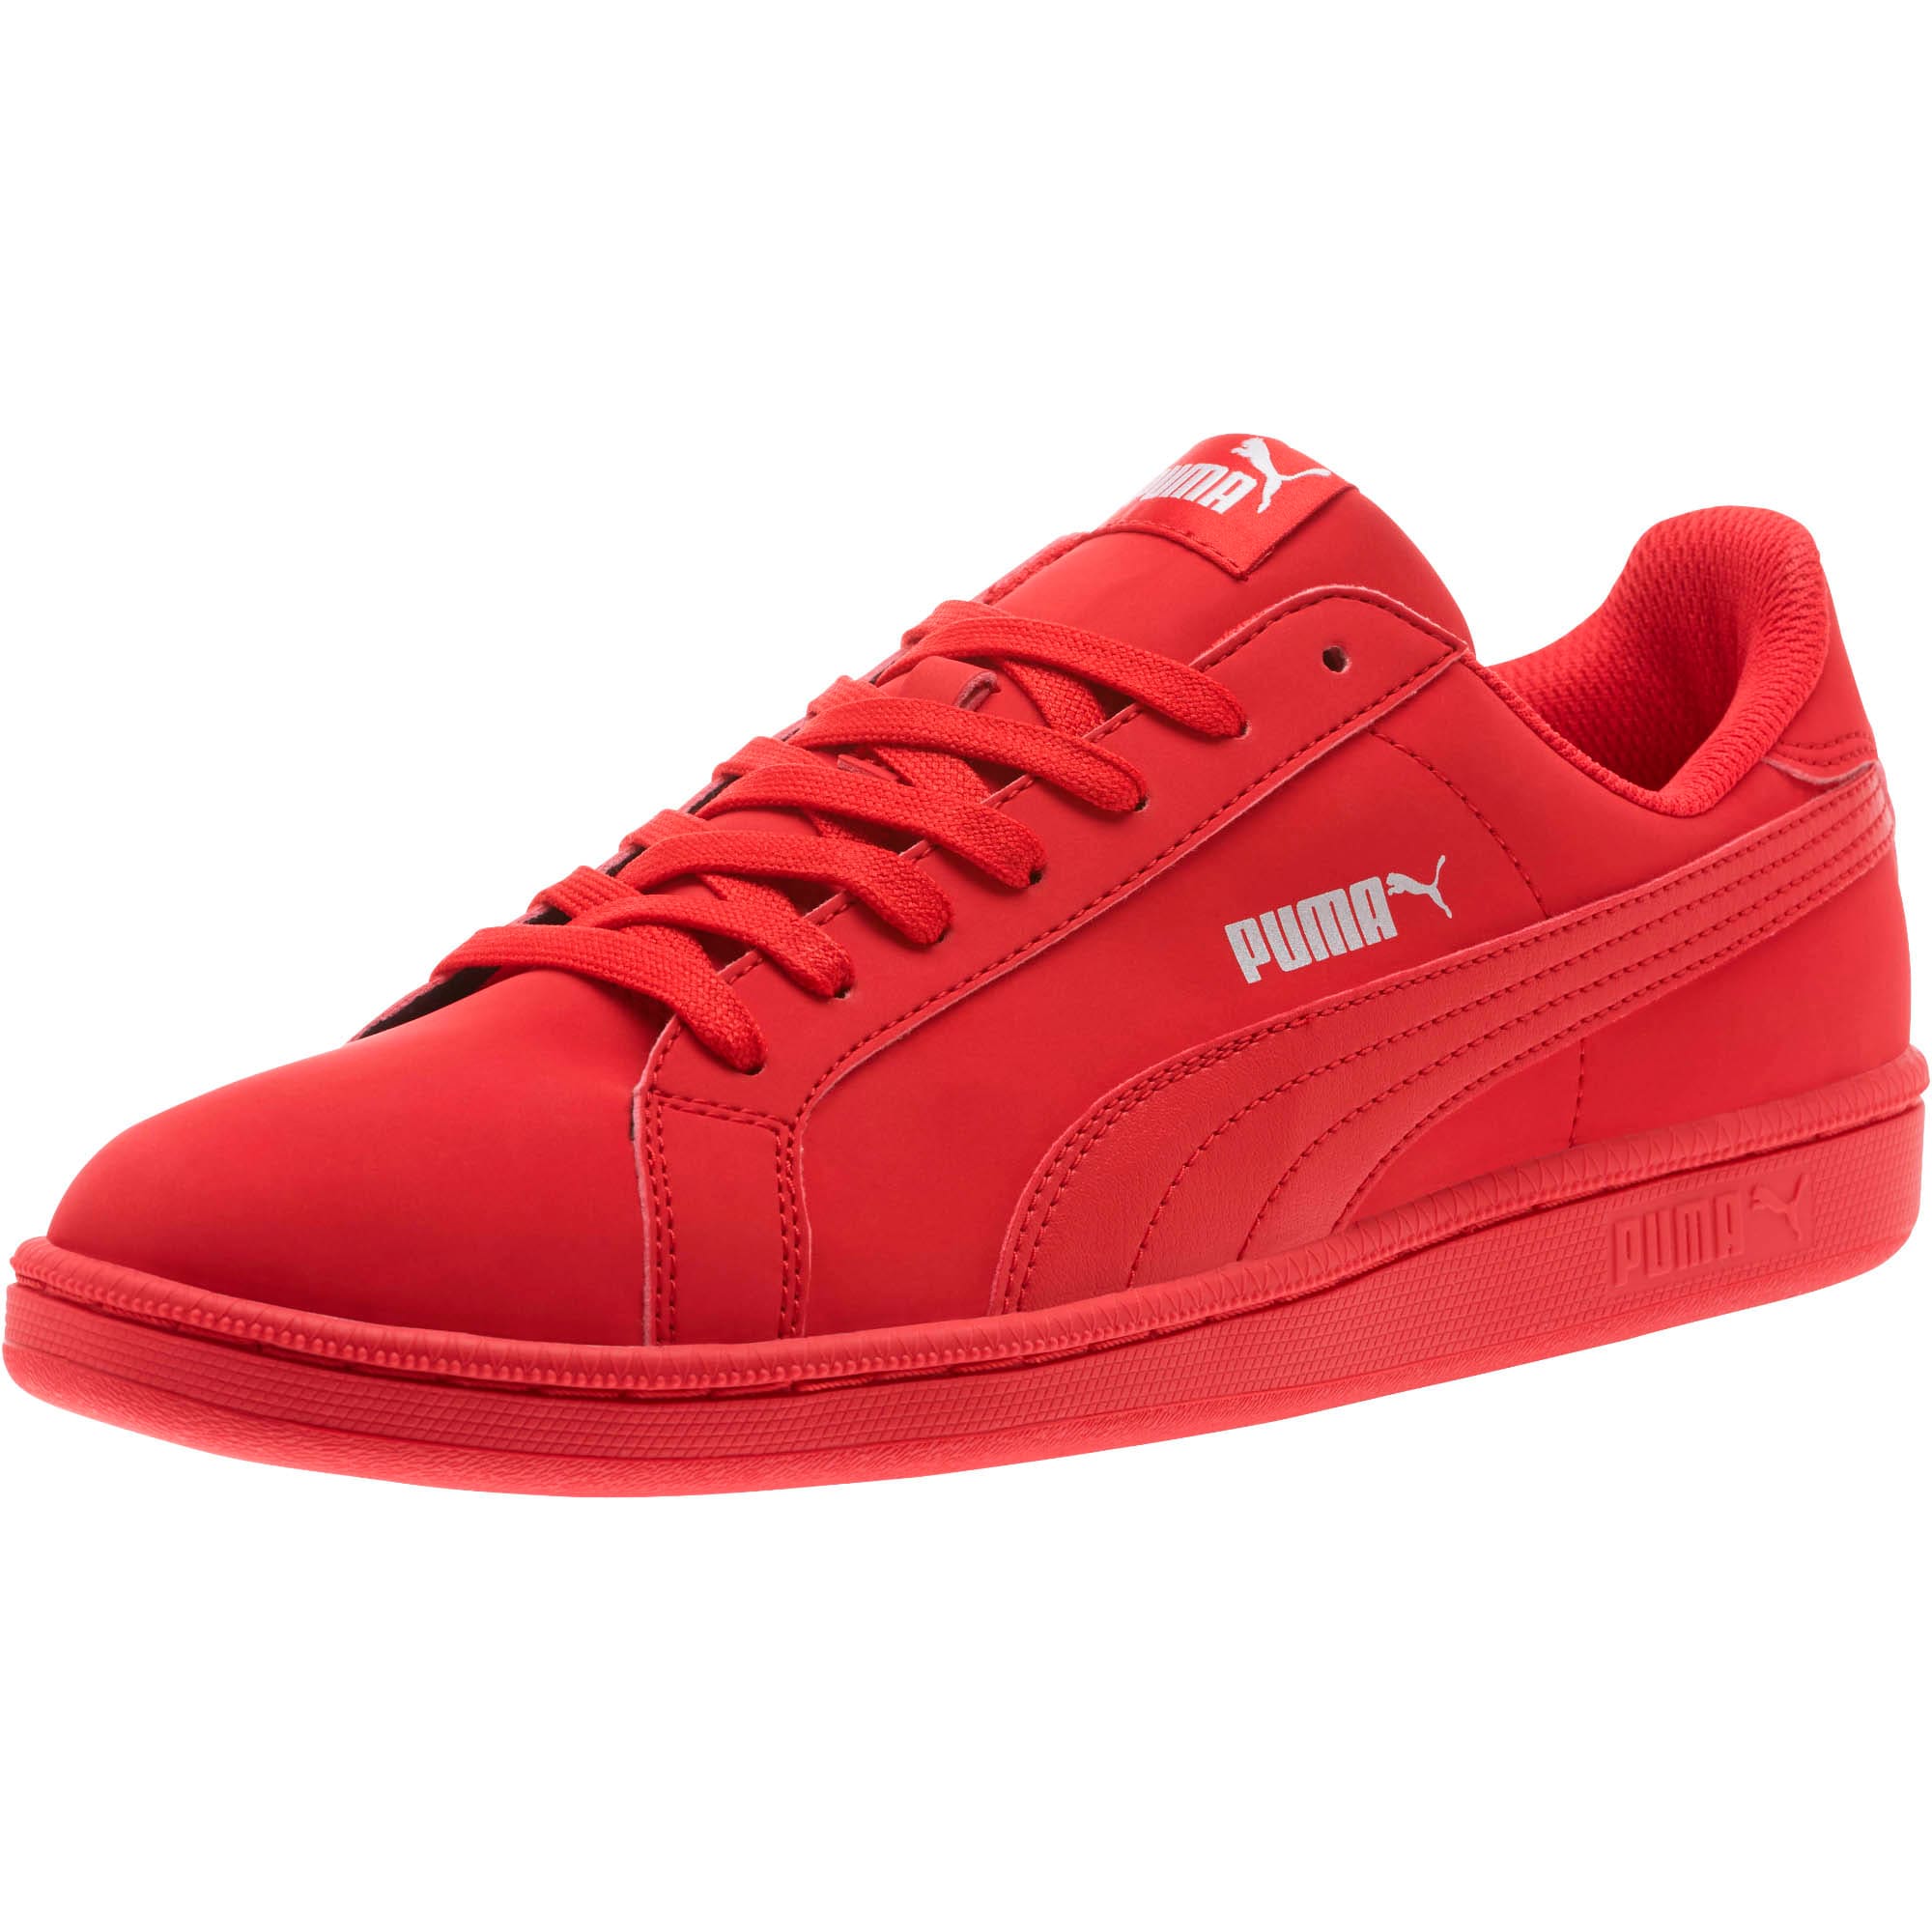 all red low top pumas